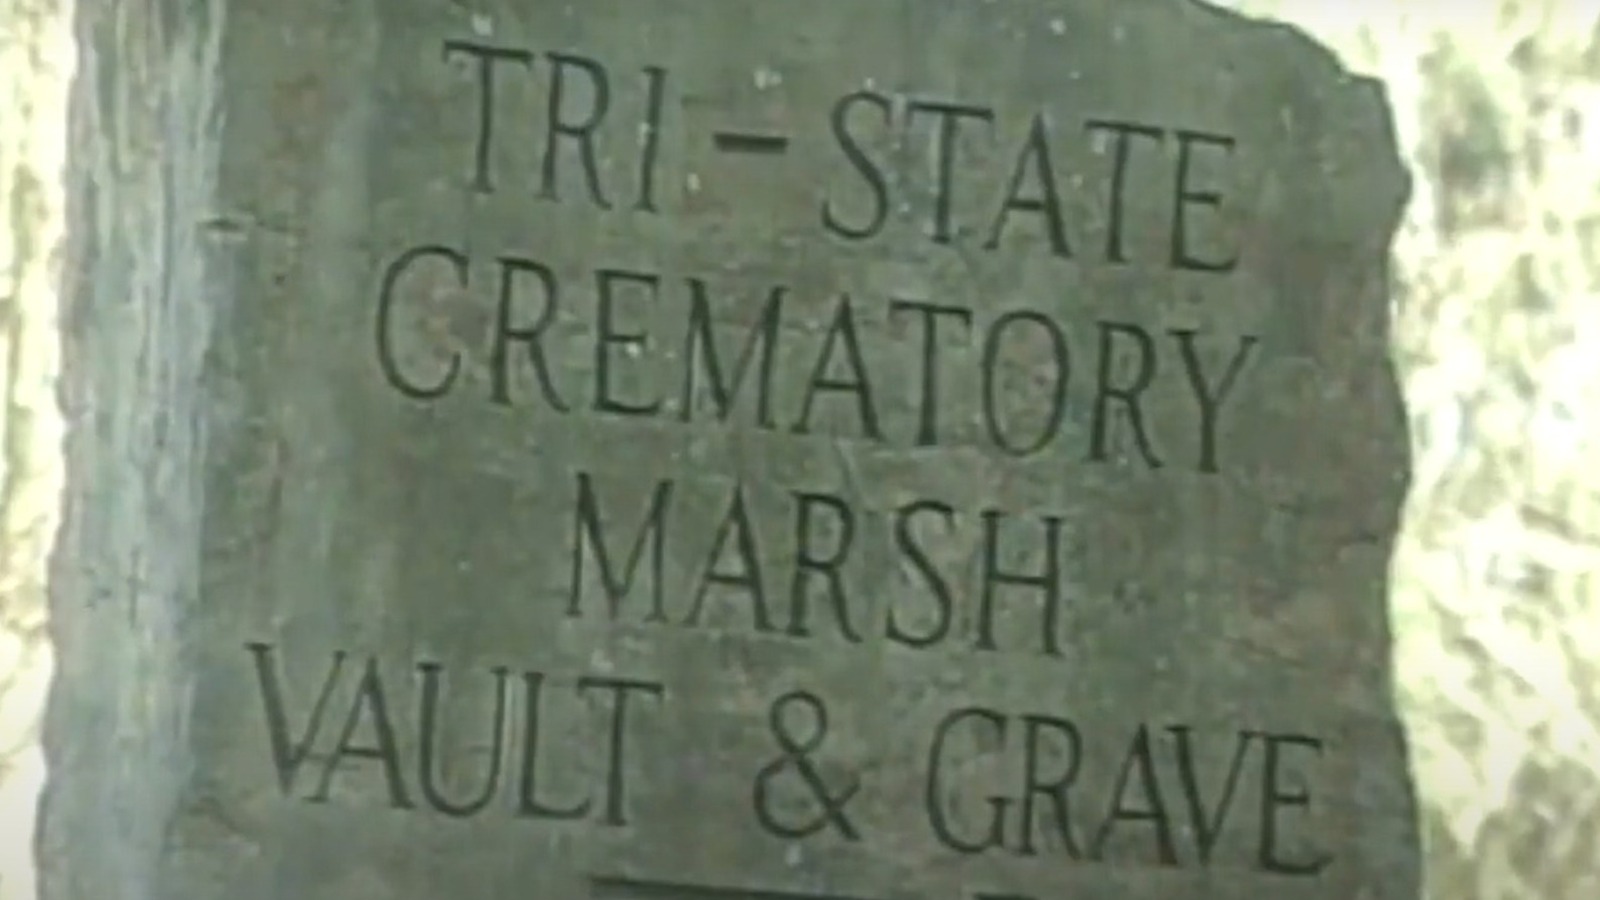 The Tri-State Crematory Scandal